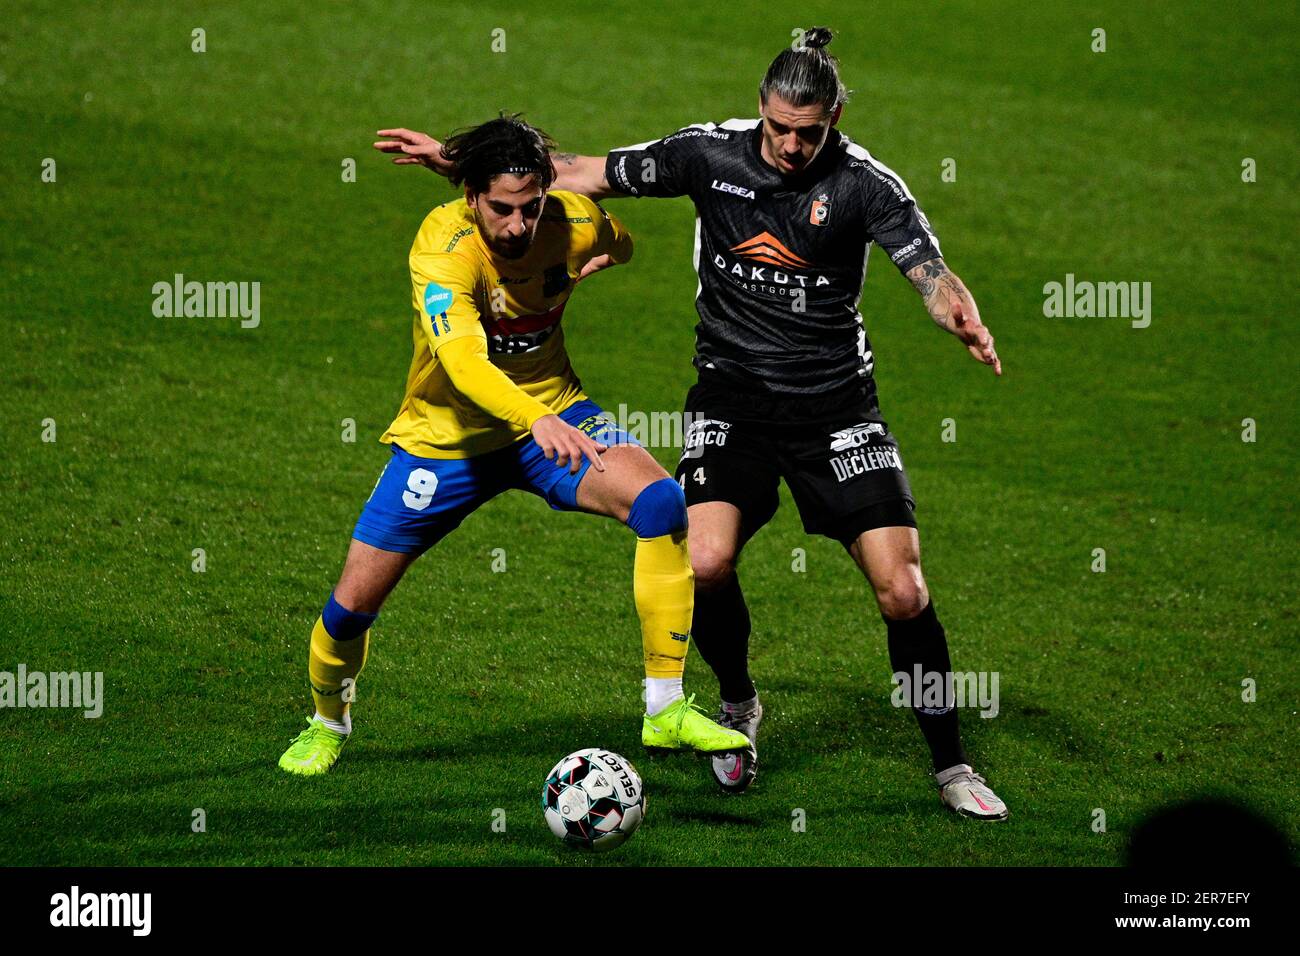 Westerlo's Atabey Cicek and Deinze's Seth De Witte fight for the ball during a soccer match between KVC Westerlo and KMSK Deinze, Sunday 28 February 2 Stock Photo